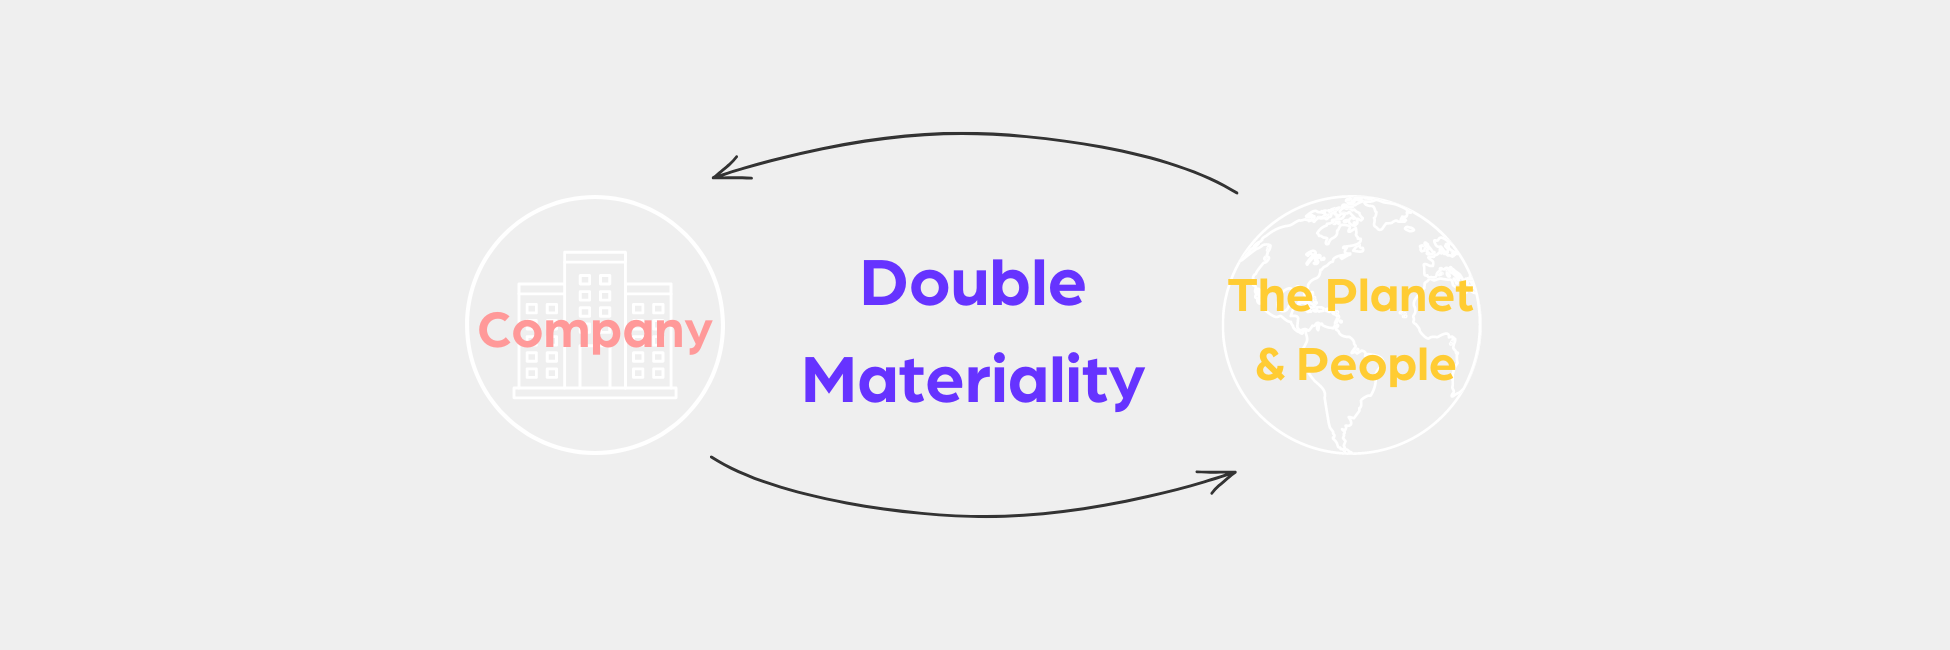 Understanding double materiality and complying to CSRd